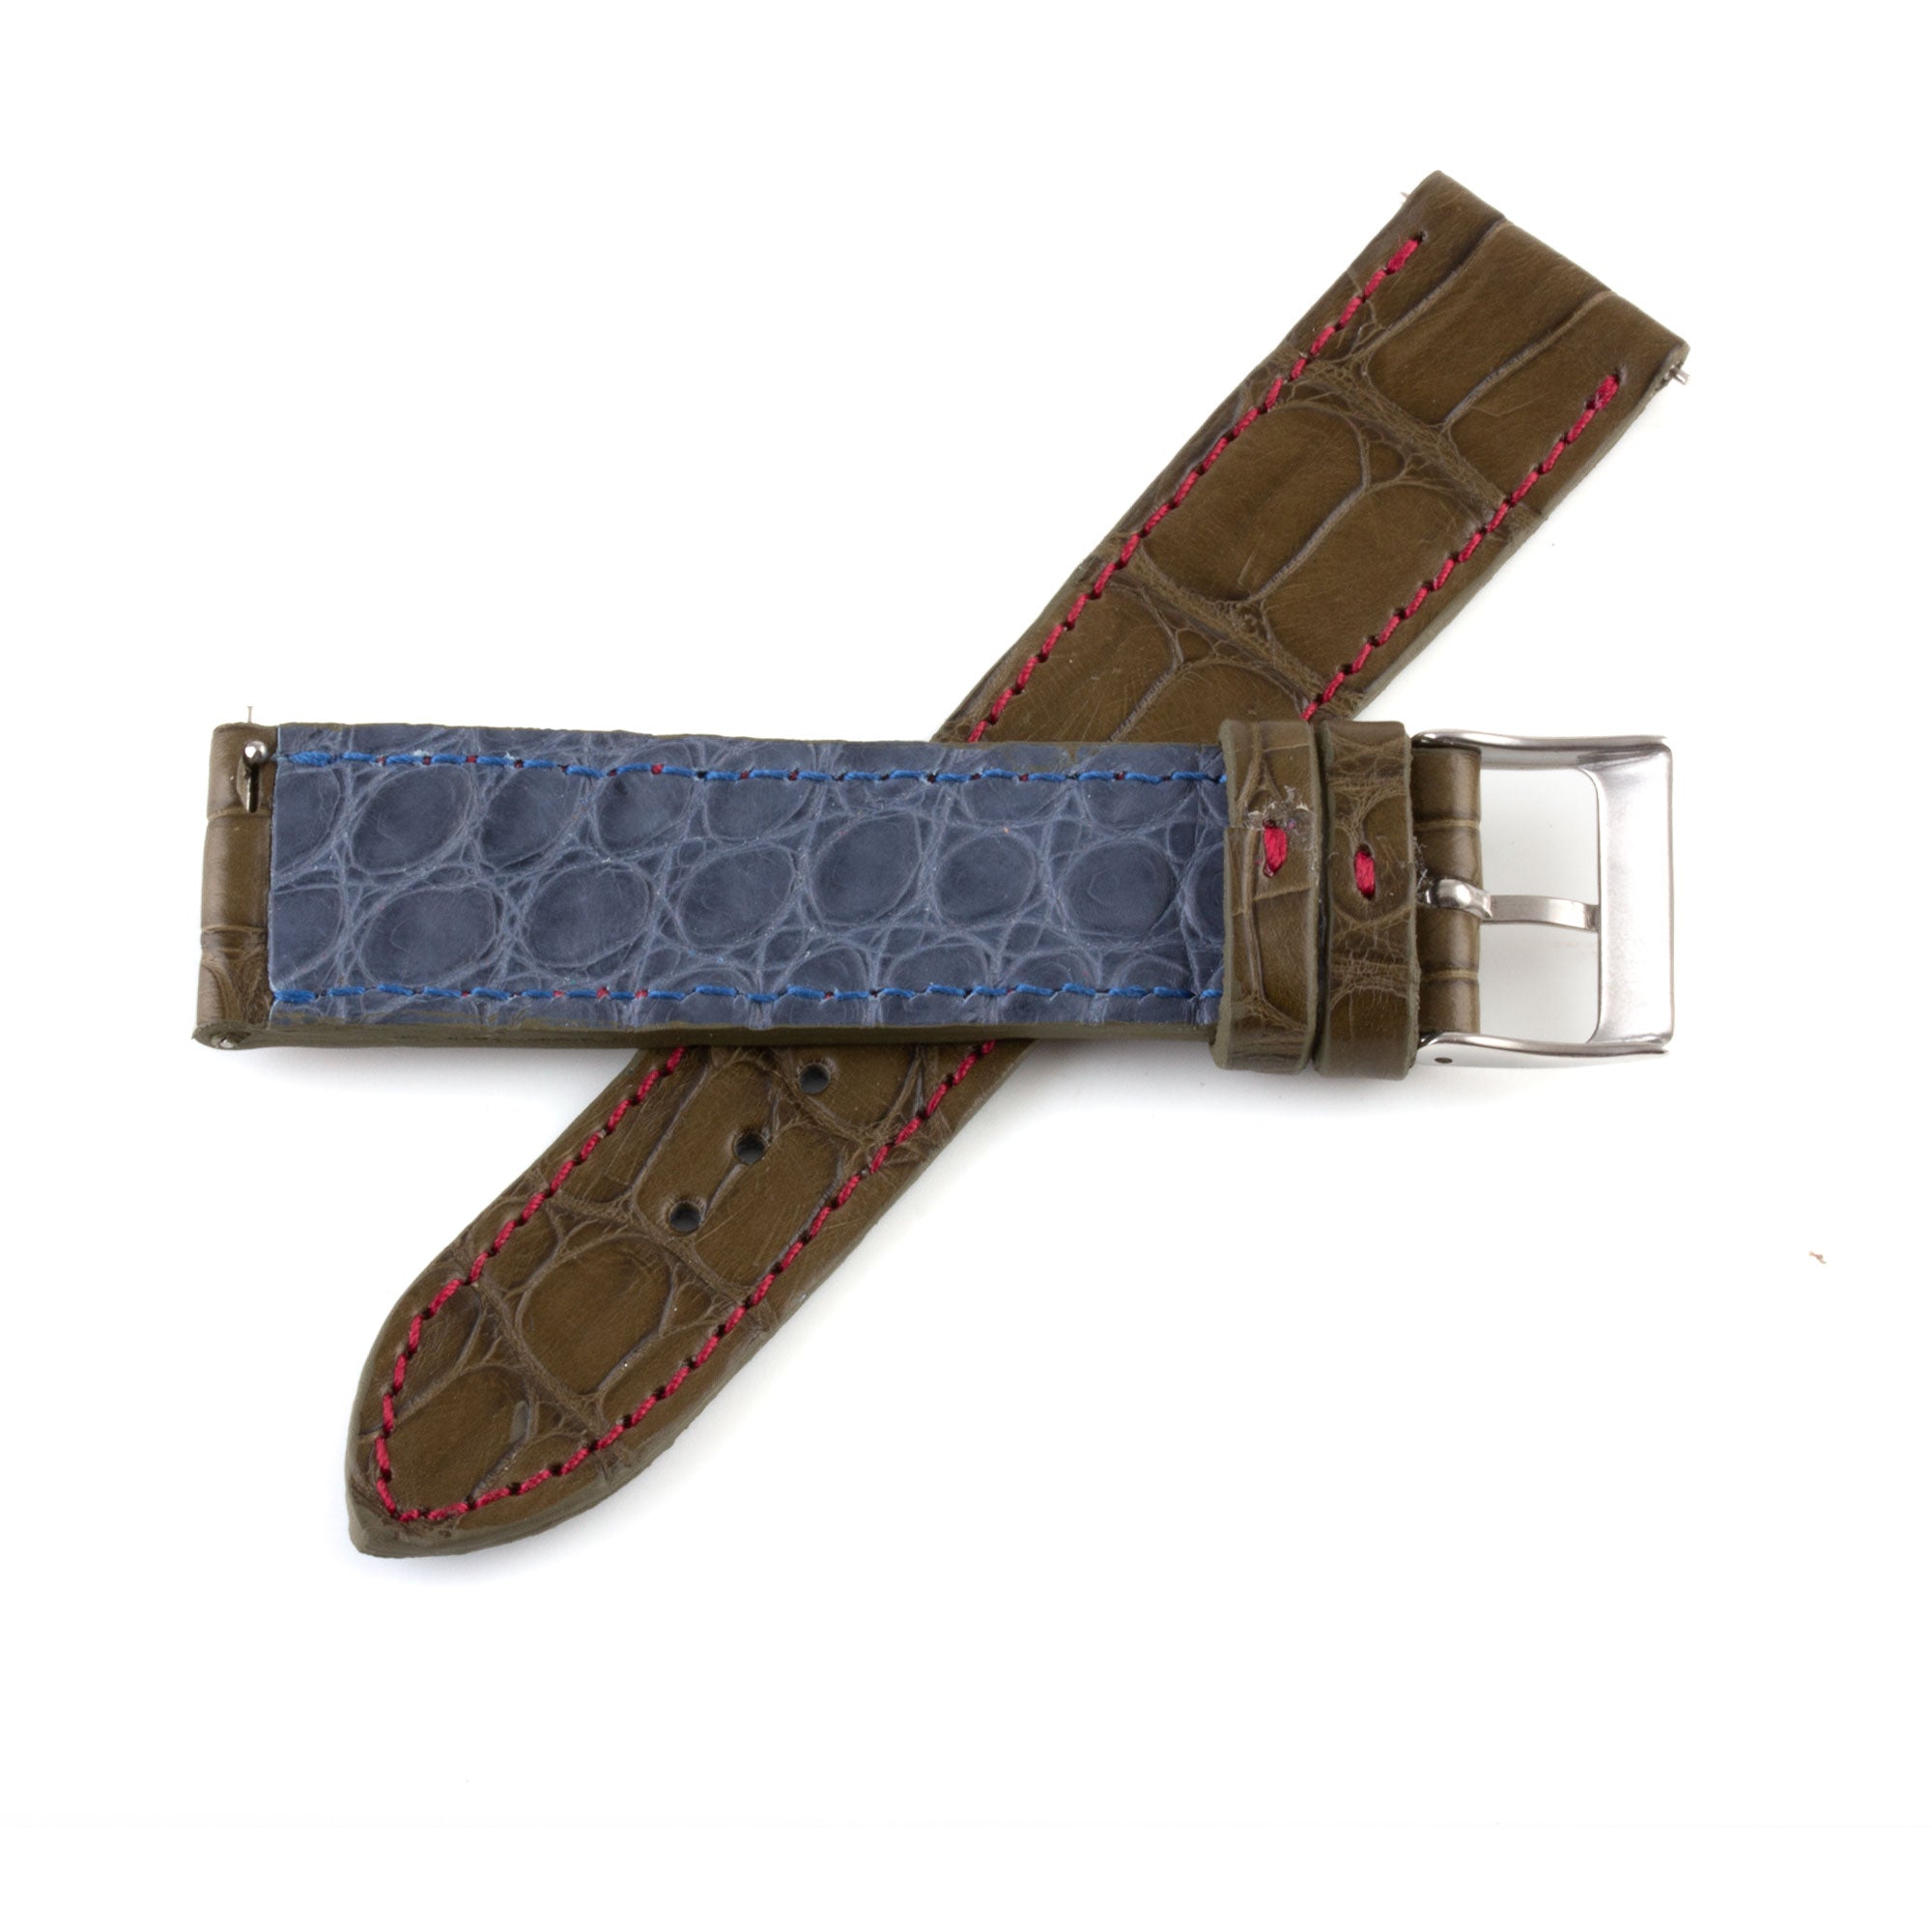 Alligator "Solo" leather watch band - 20mm width (0.79 inches) / Size M (n° 7)